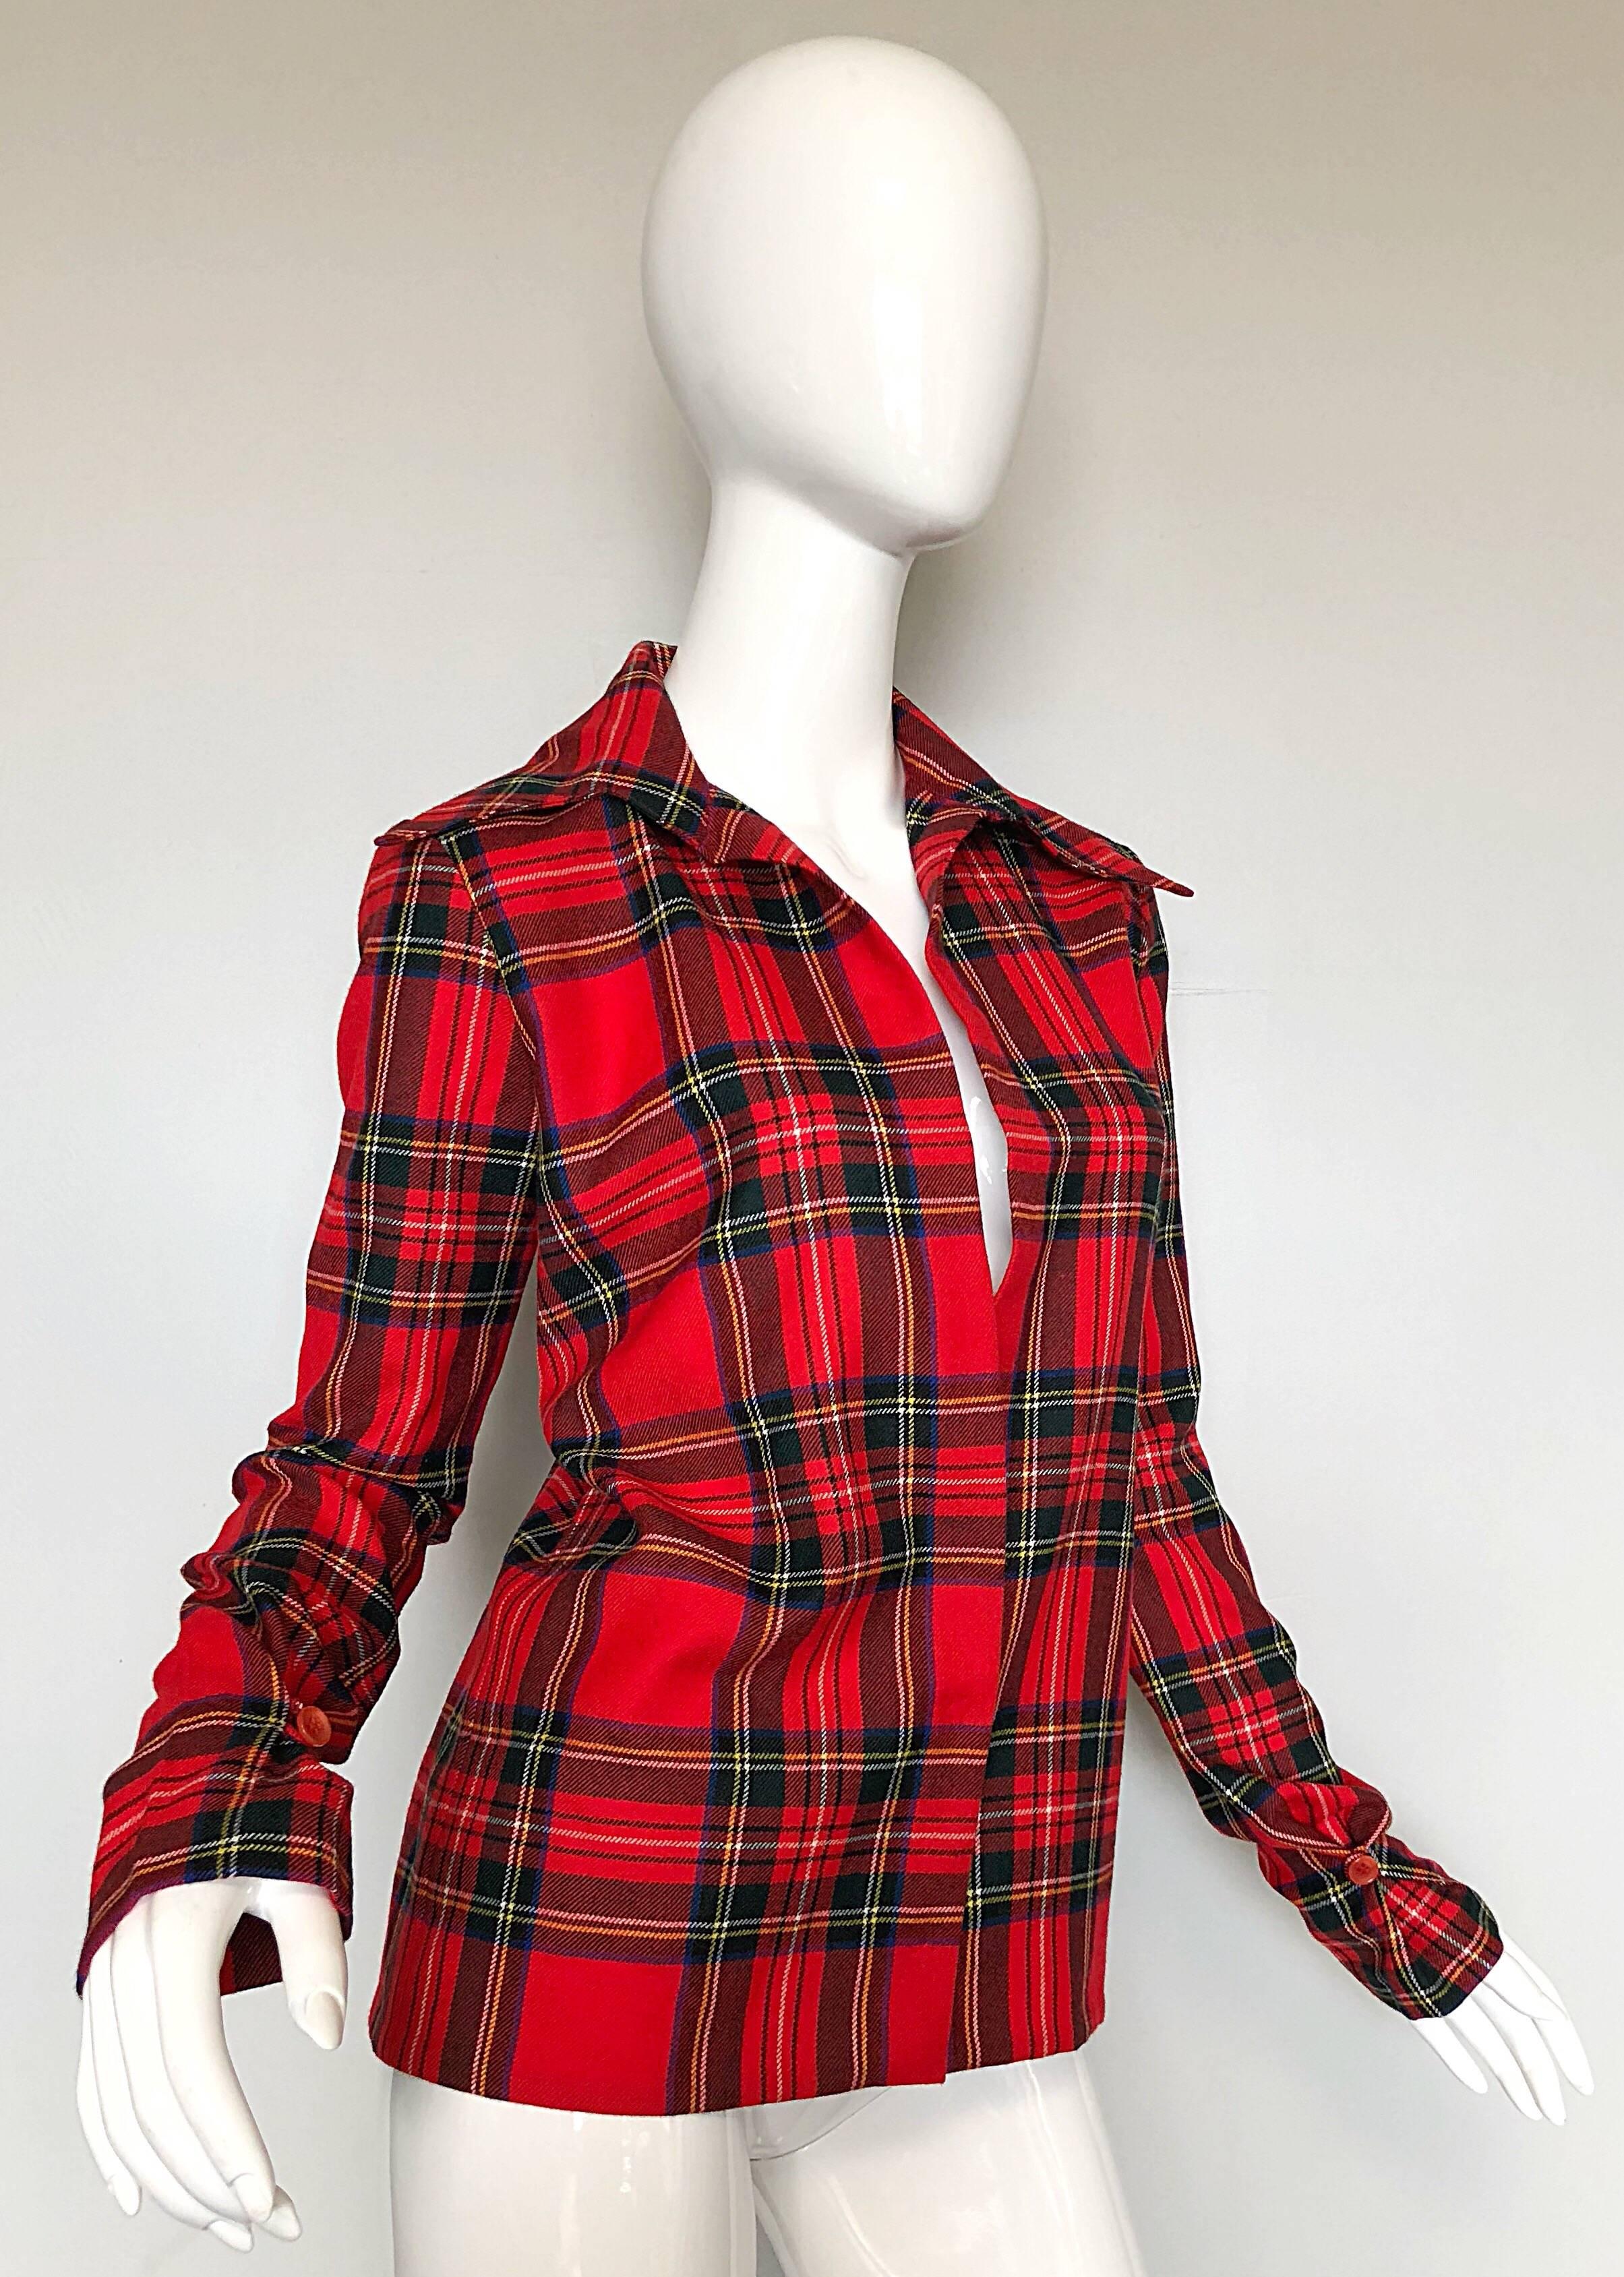 Dolce & Gabbana 1990s Red Tartan Plaid Virgin Wool 90s Plunging Flannel Shirt In Excellent Condition For Sale In San Diego, CA